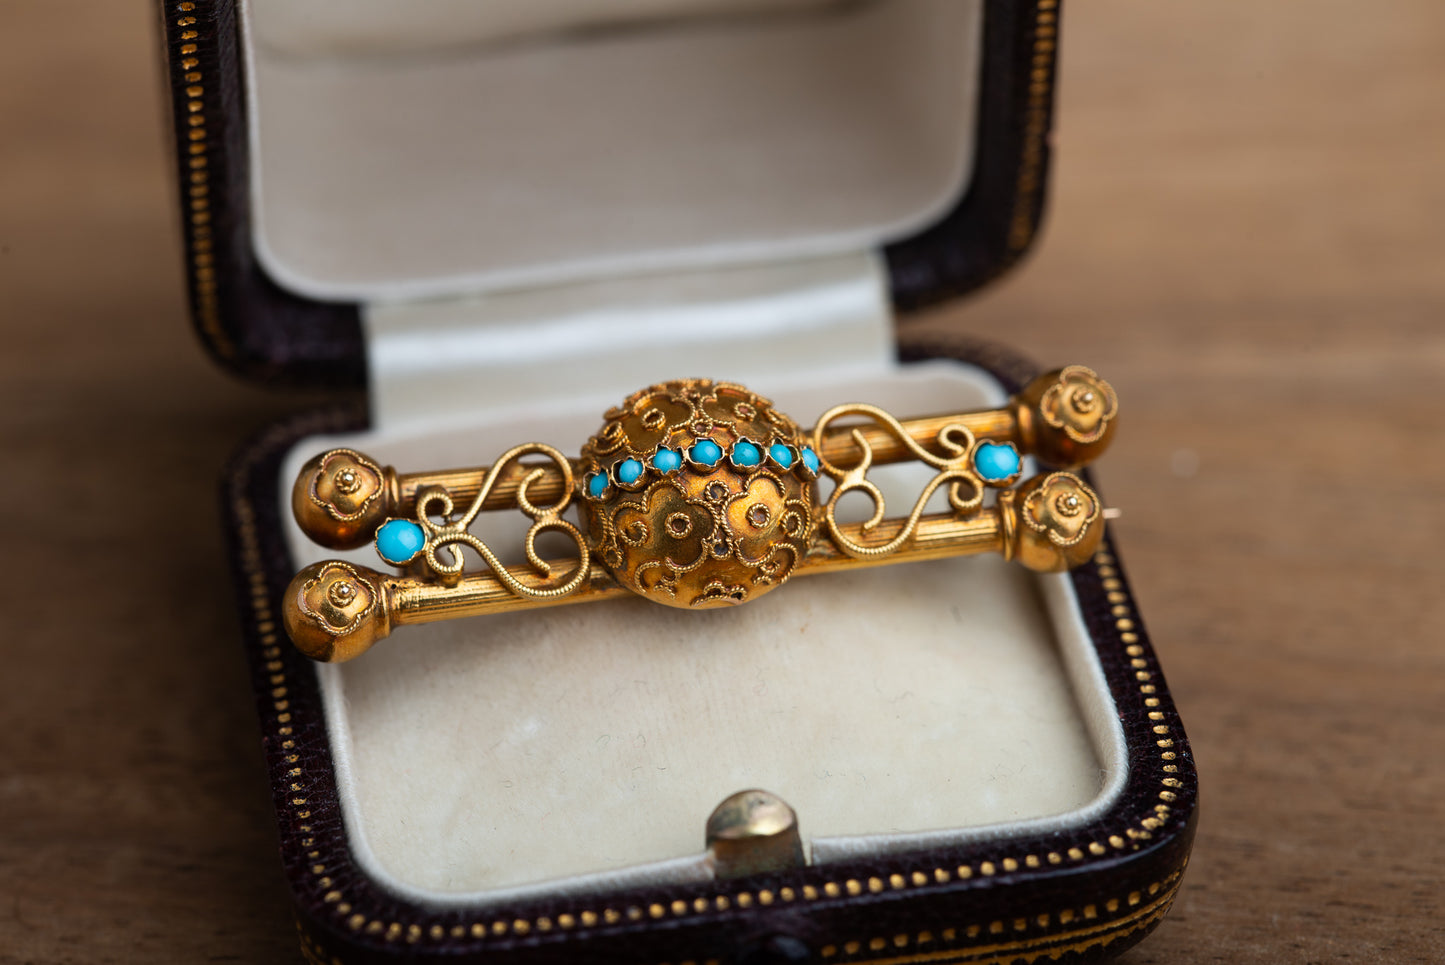 19th Century Victorian Etruscan Revival Brooch